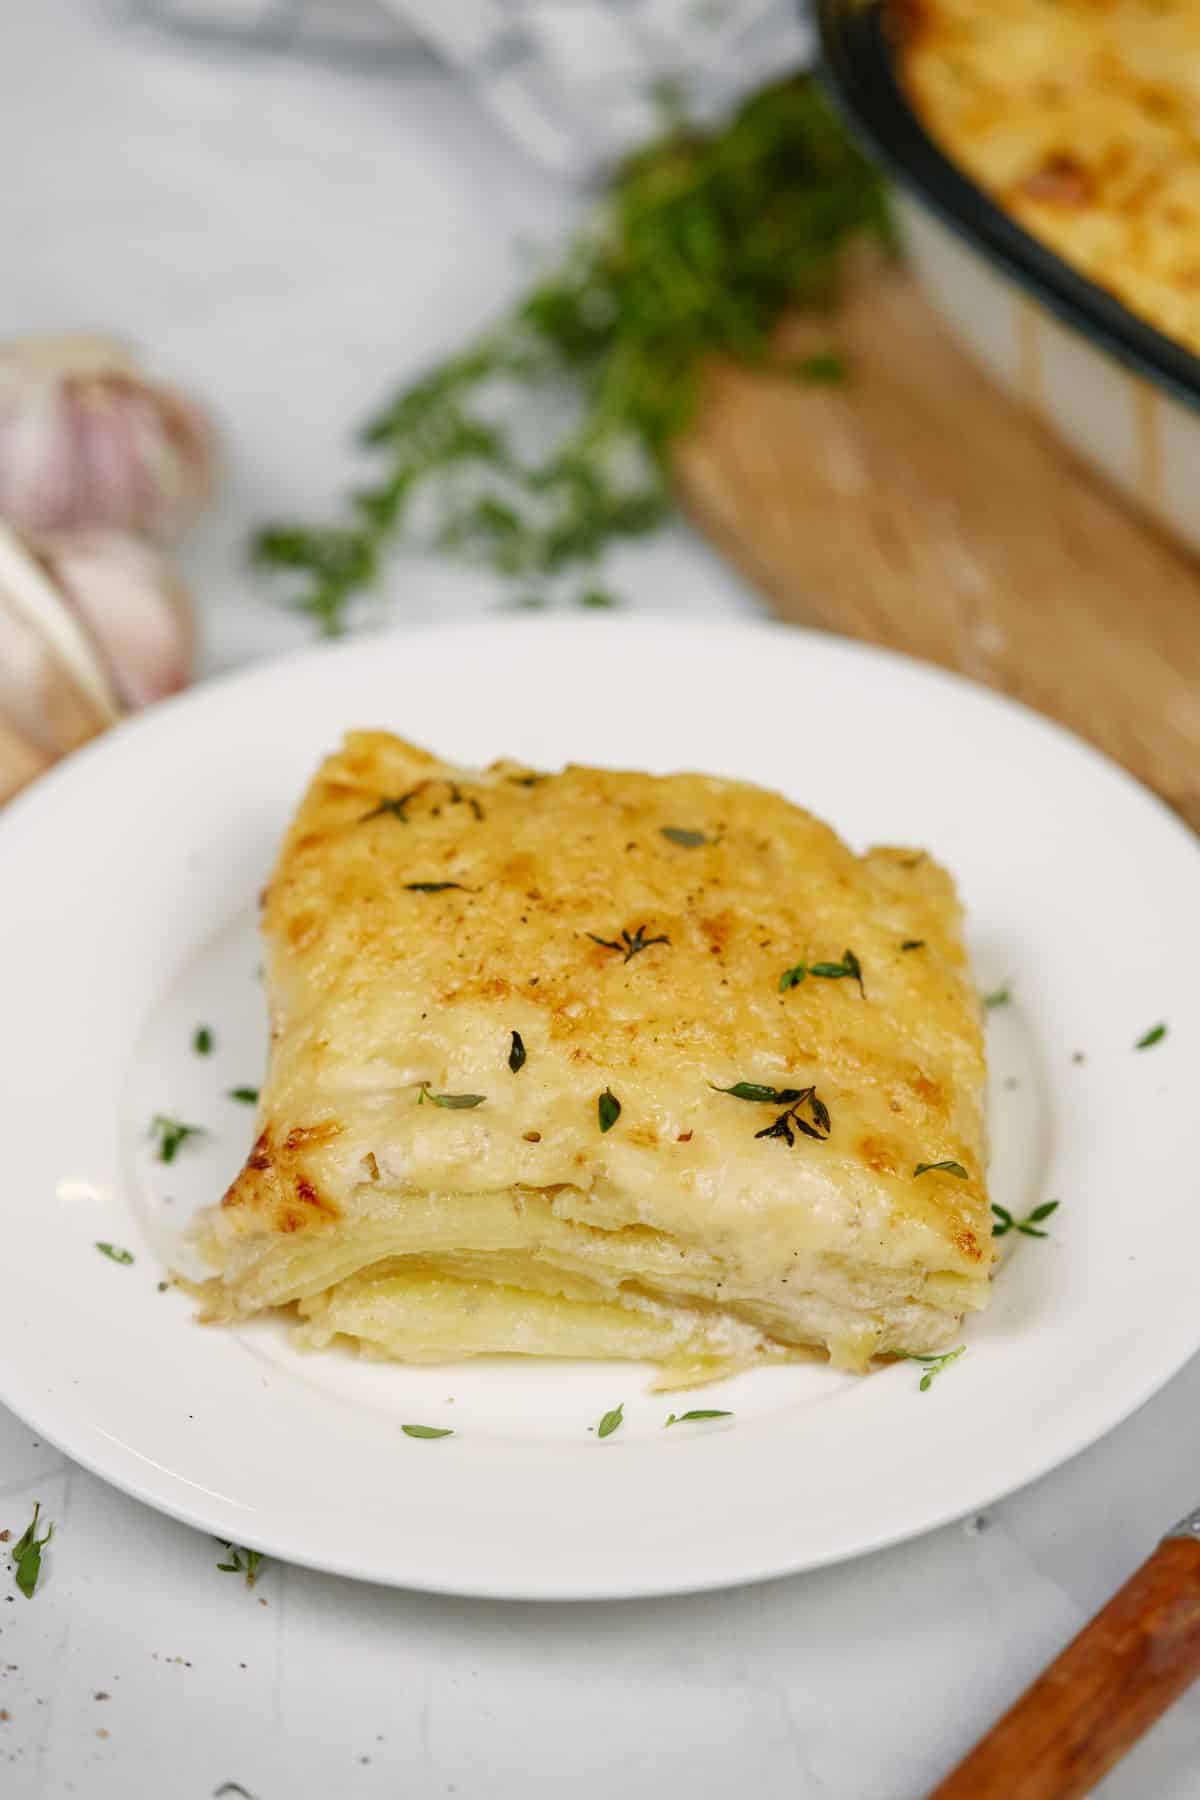 square of potato casserole with herbs on top sittingo n white plate